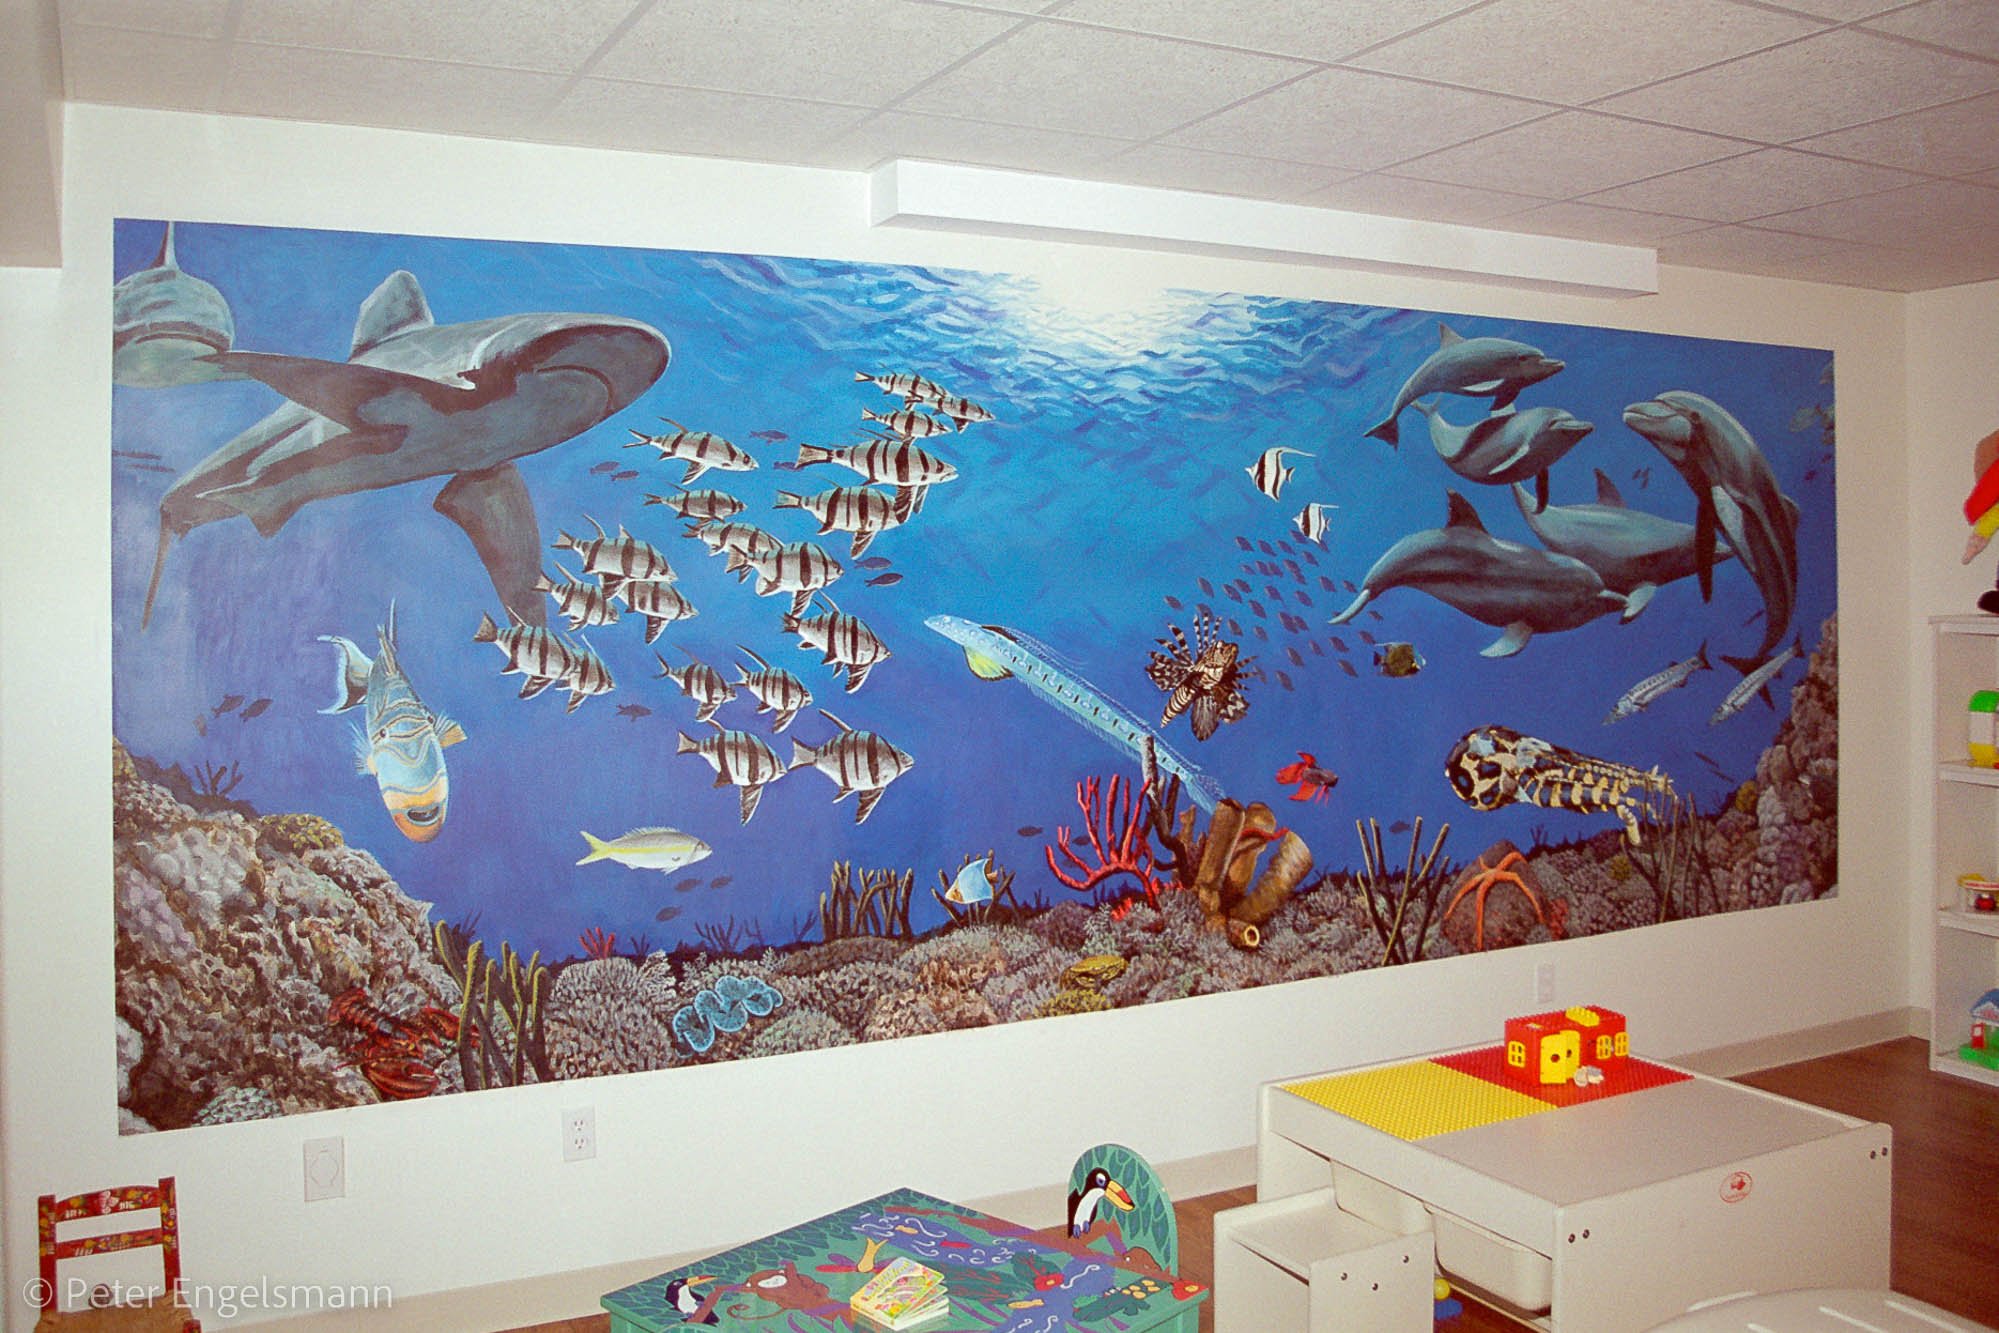  Under the Sea Mural, acrylic on wallboard, private residence. © Peter K. Engelsmann 